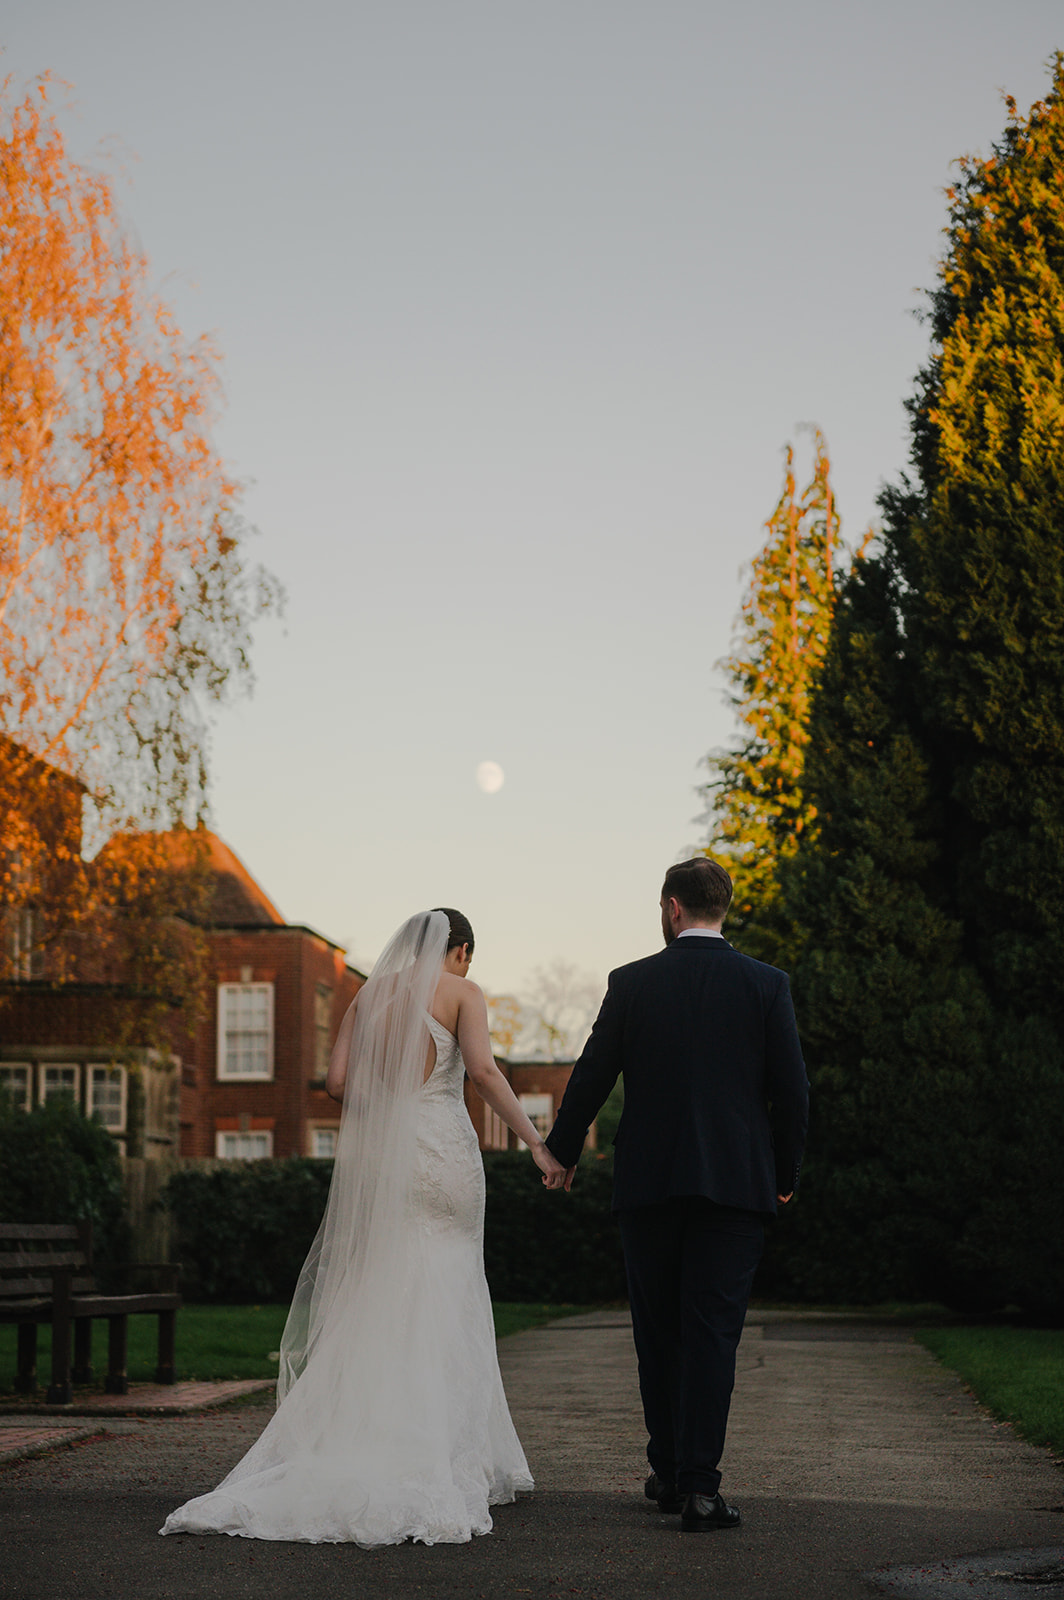 the bride and groom walking in the garden at highbury hall with the moon in the sky above them